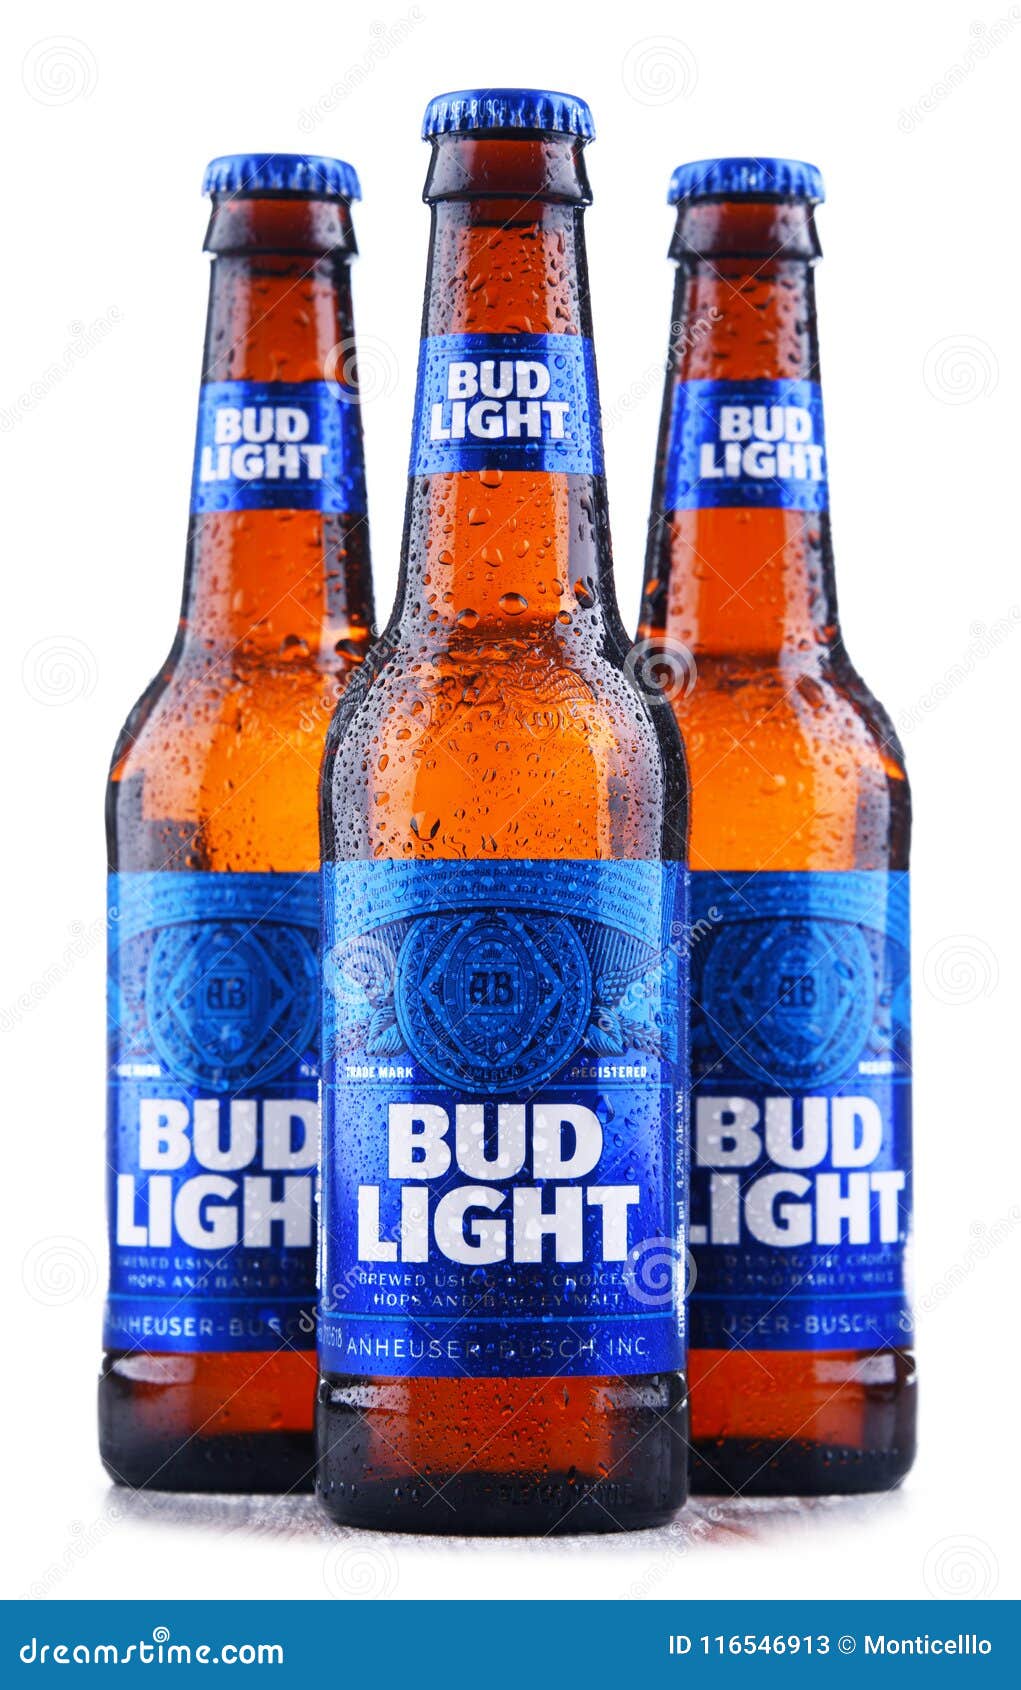 Bottles of Bud Light beer editorial stock photo. Image of